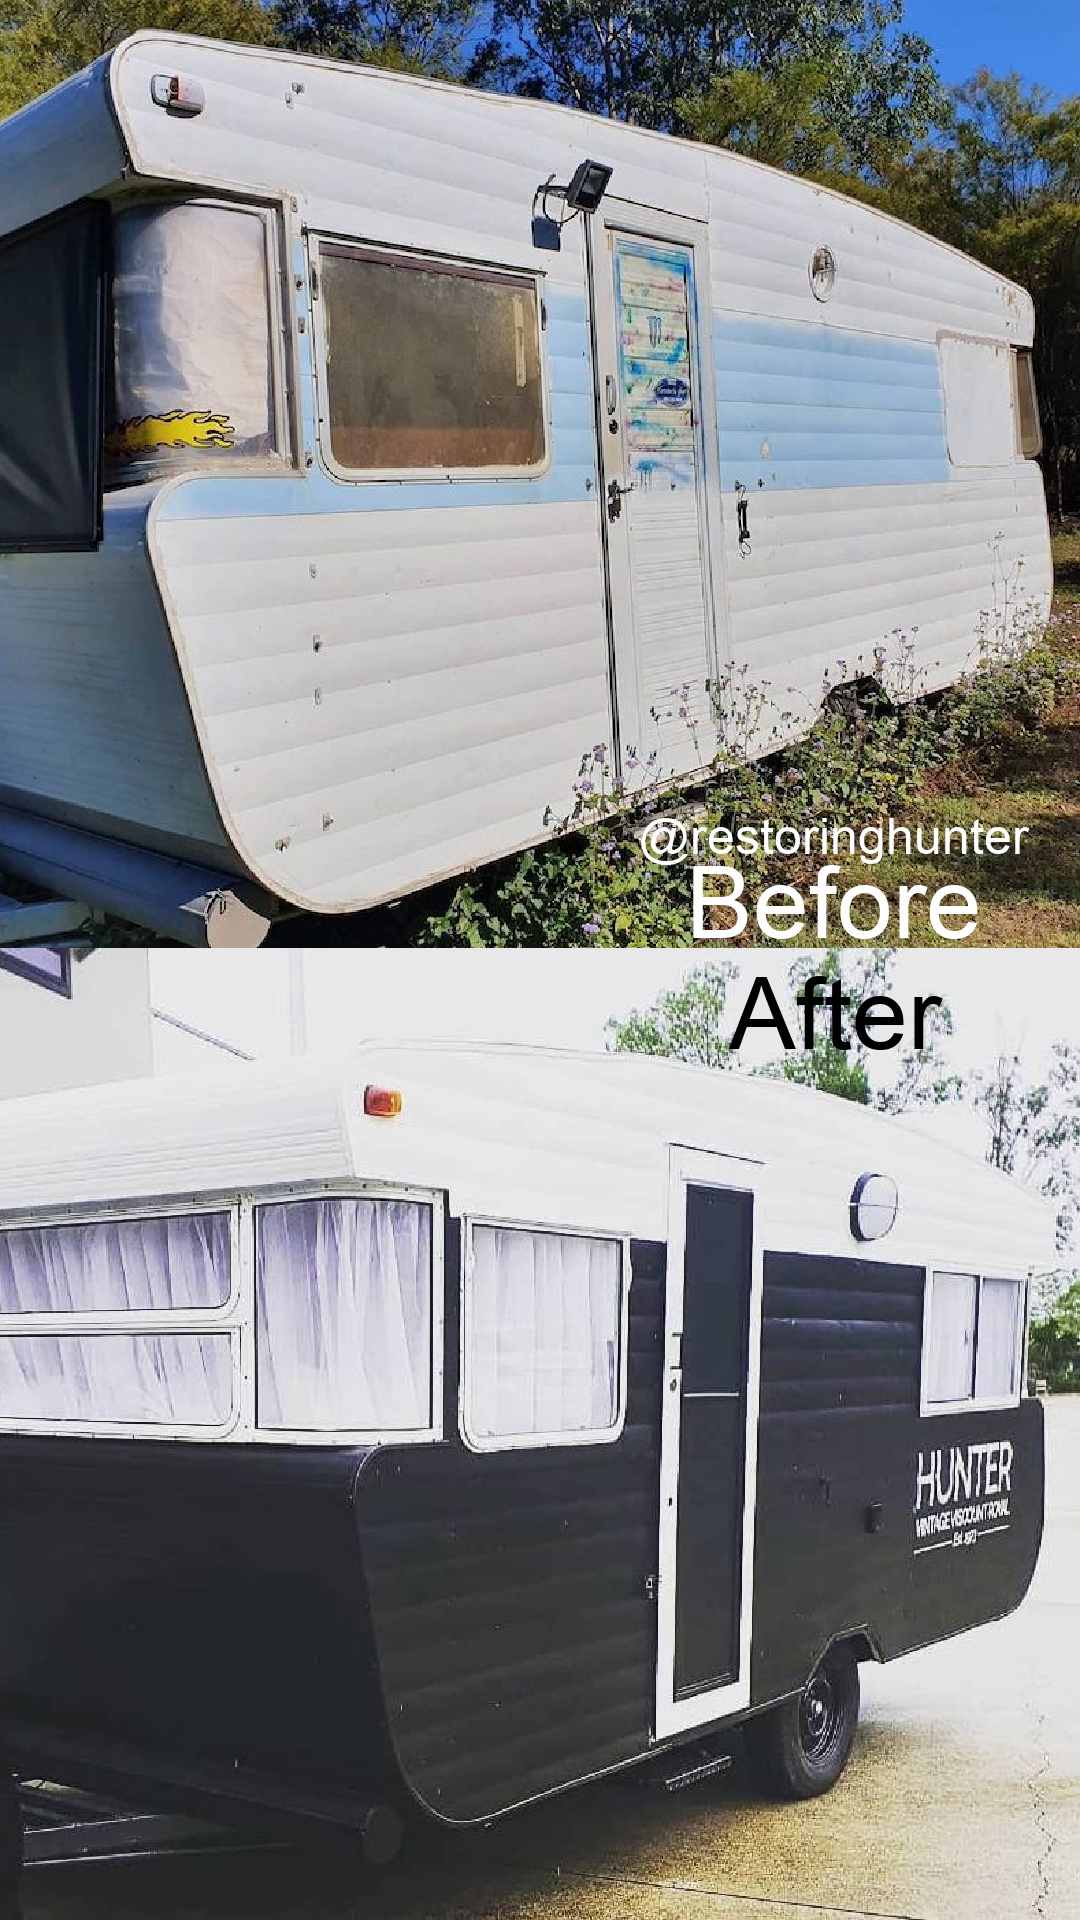 Before and after photos of the exterior of a renovated vintage travel trailer.